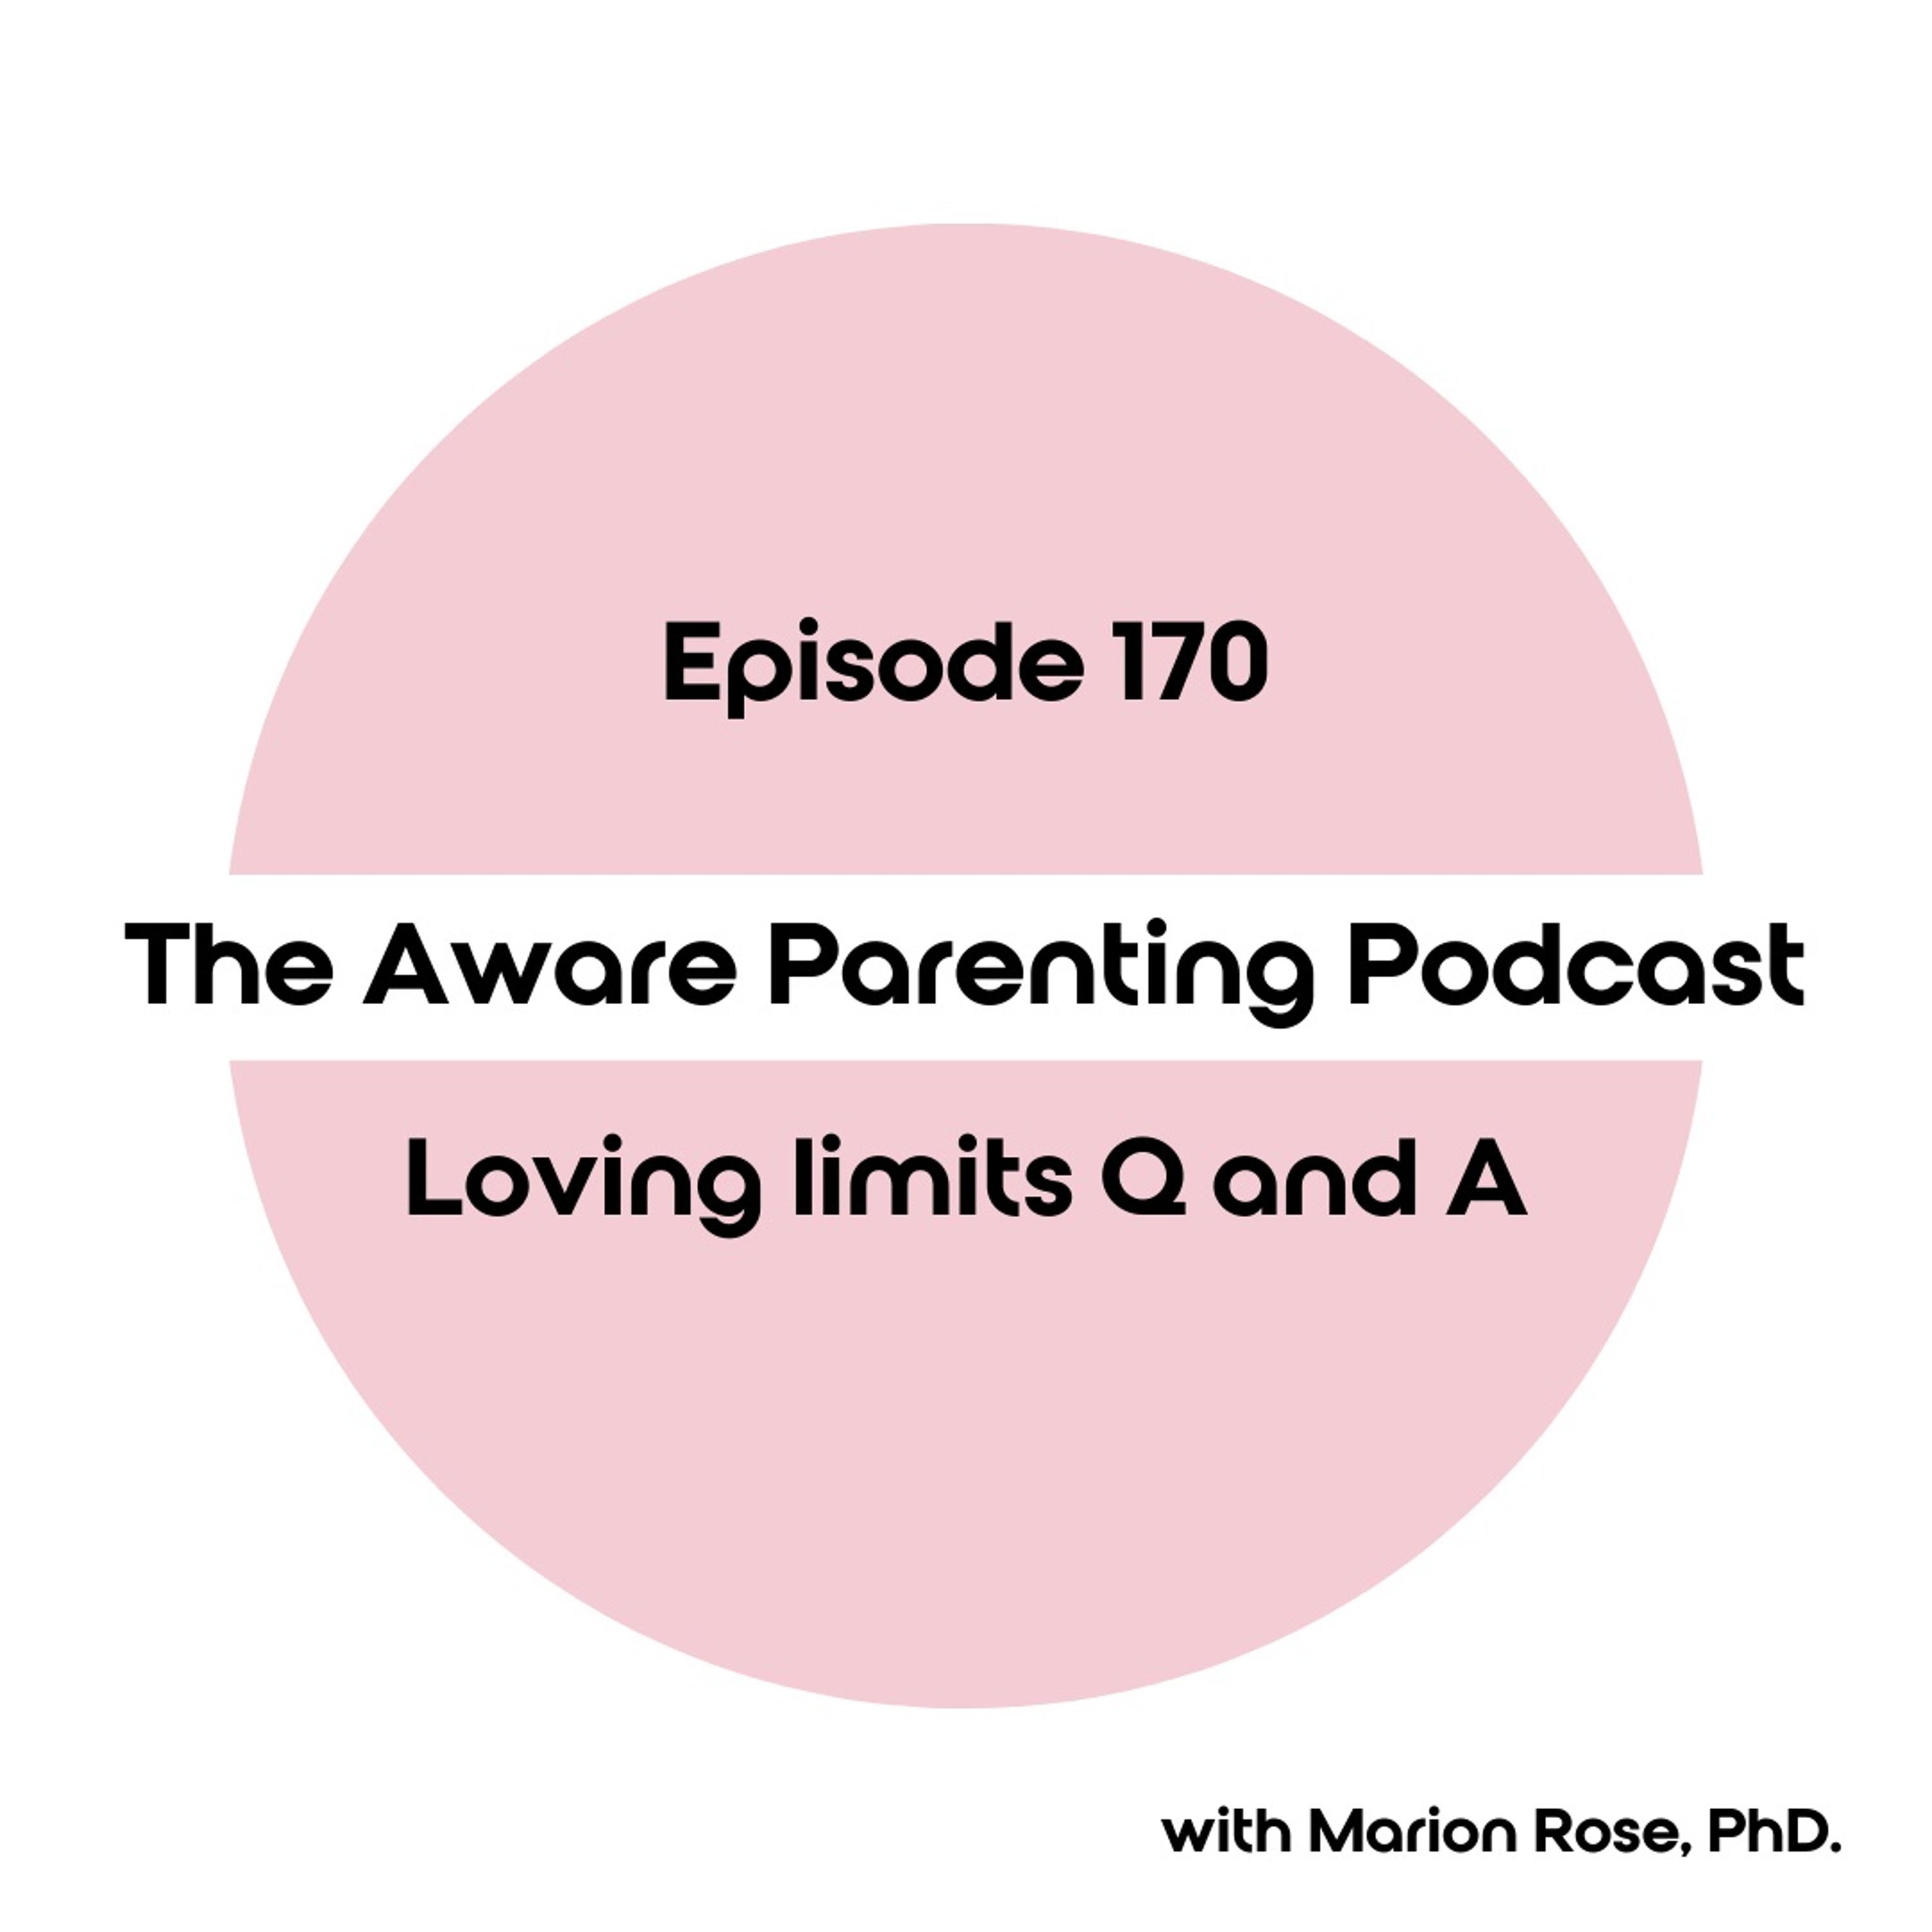 Episode 170: Loving limits Q and A